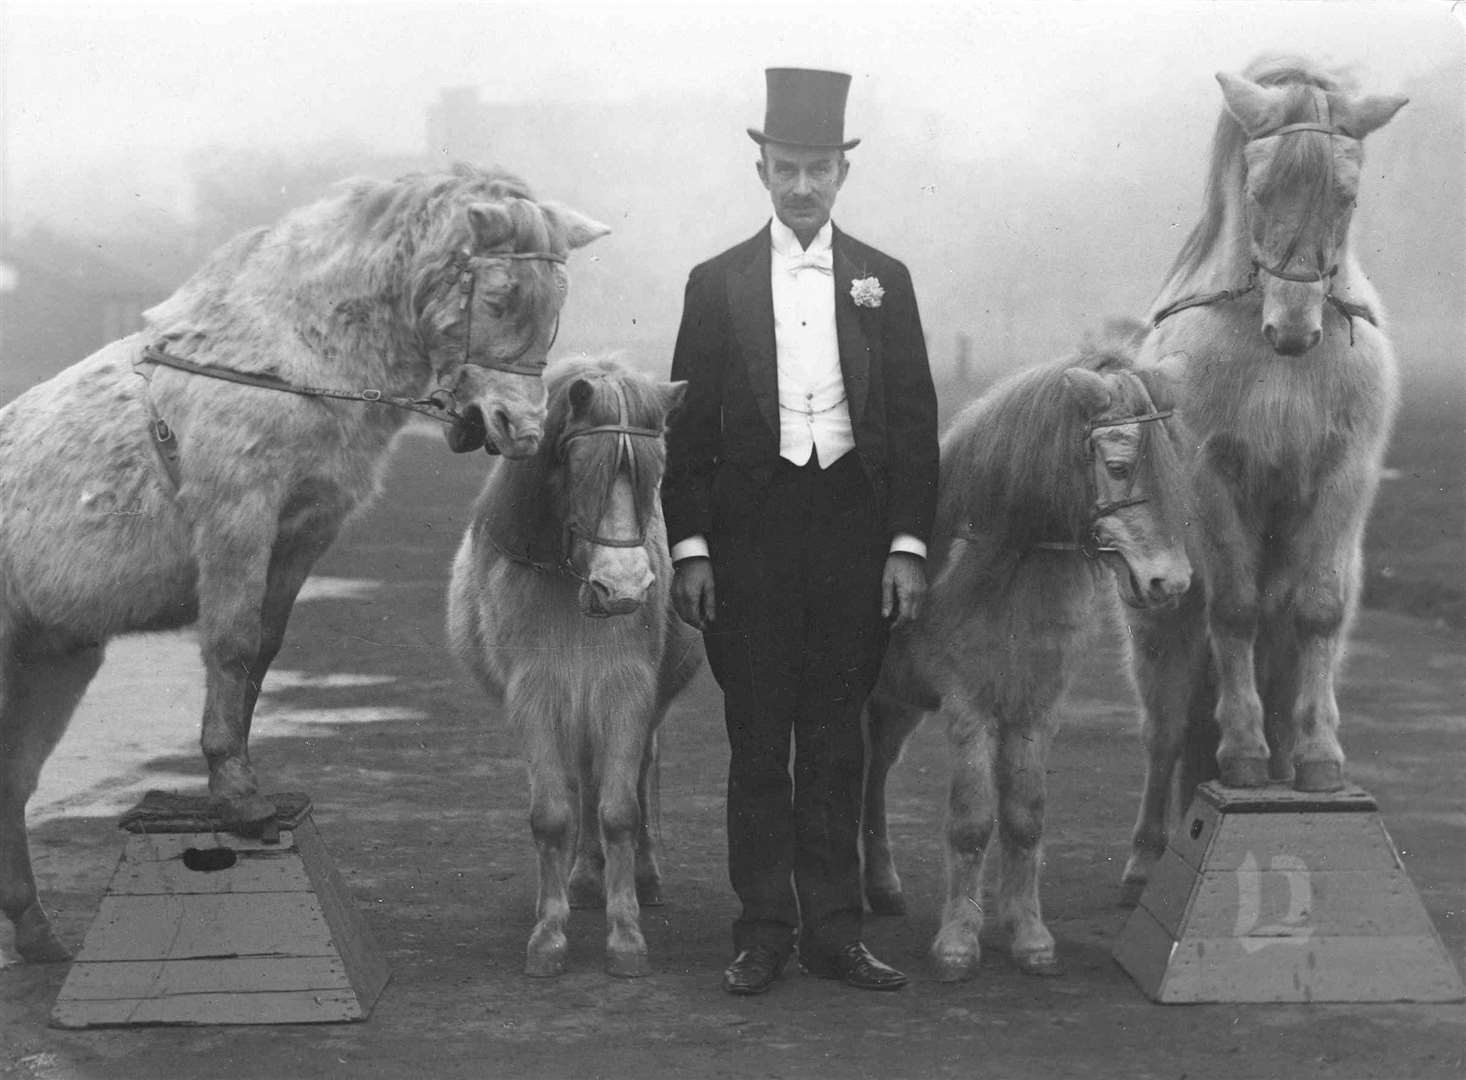 Sir Garrard with his famous Royal Cream Ponies